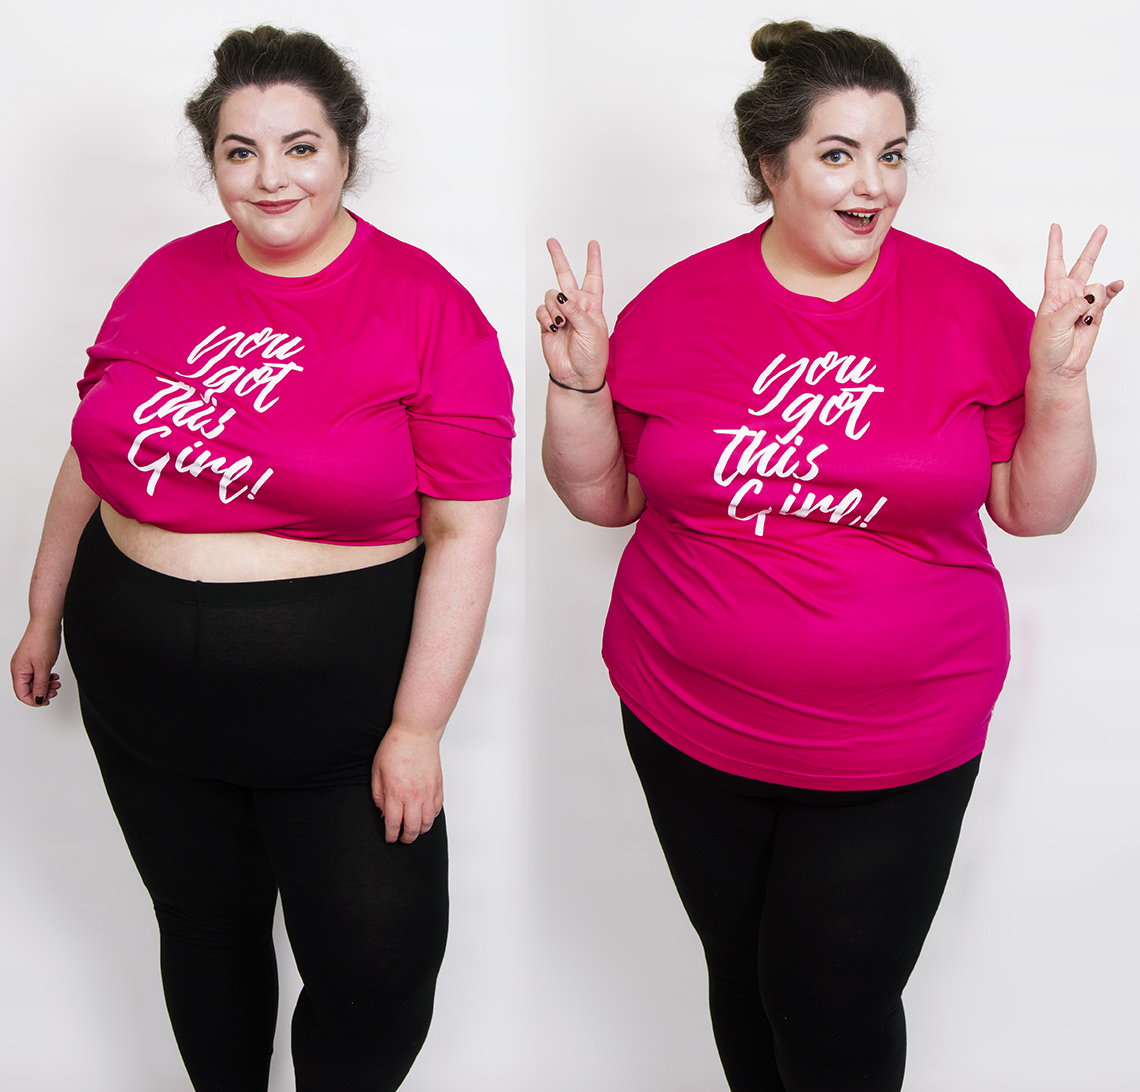 Let's Get Physical - Plus Size Gym Wear from OBD Clothing